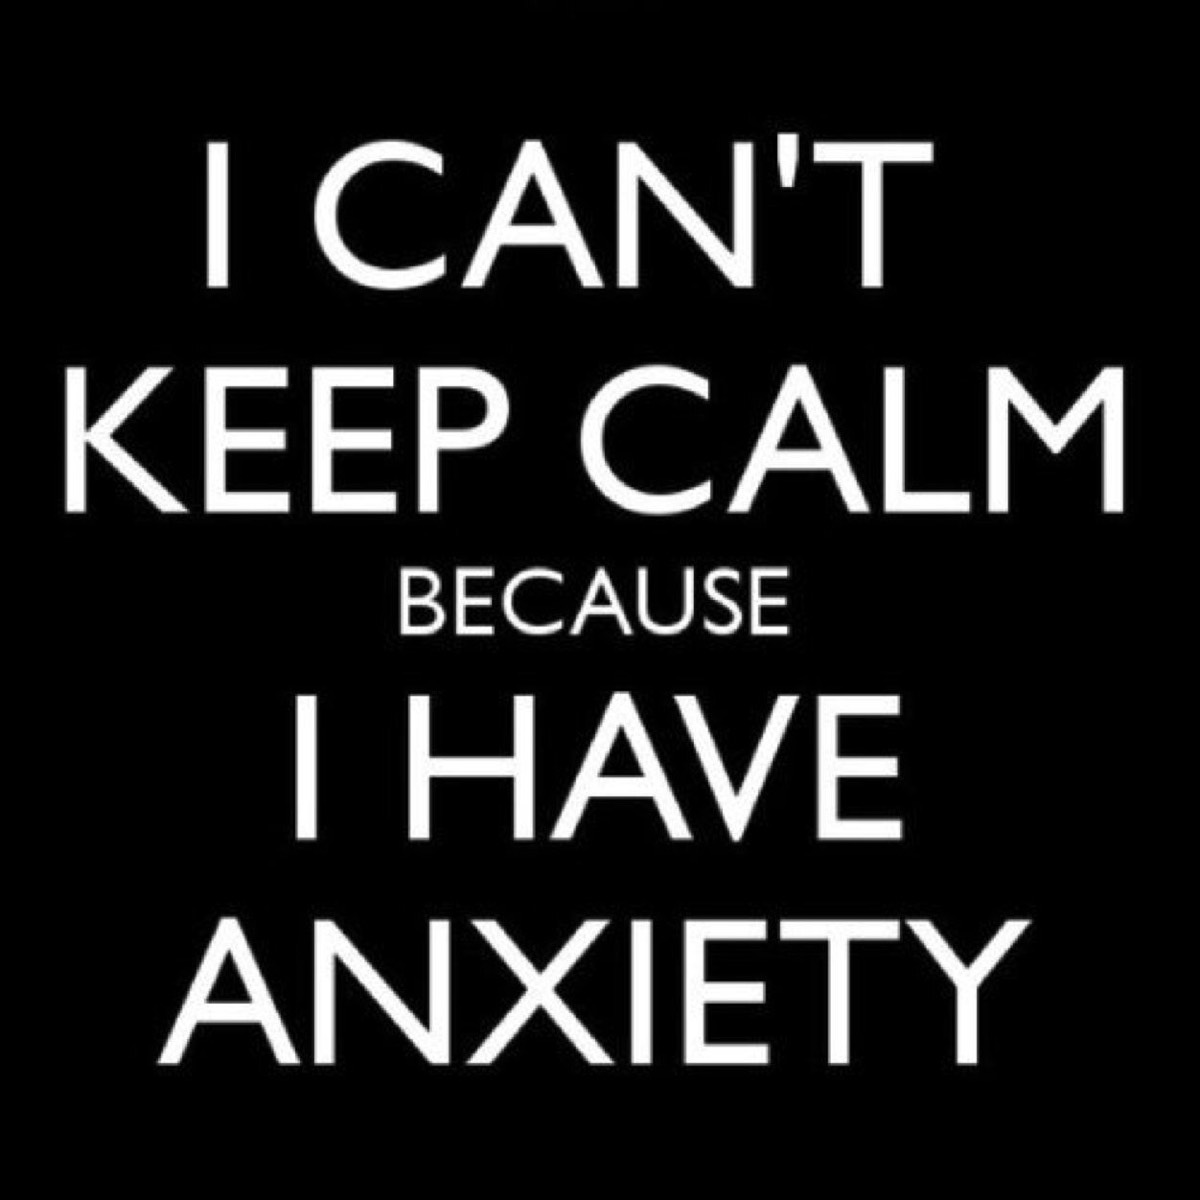 Defendant Cannot Keep Calm Anxiety